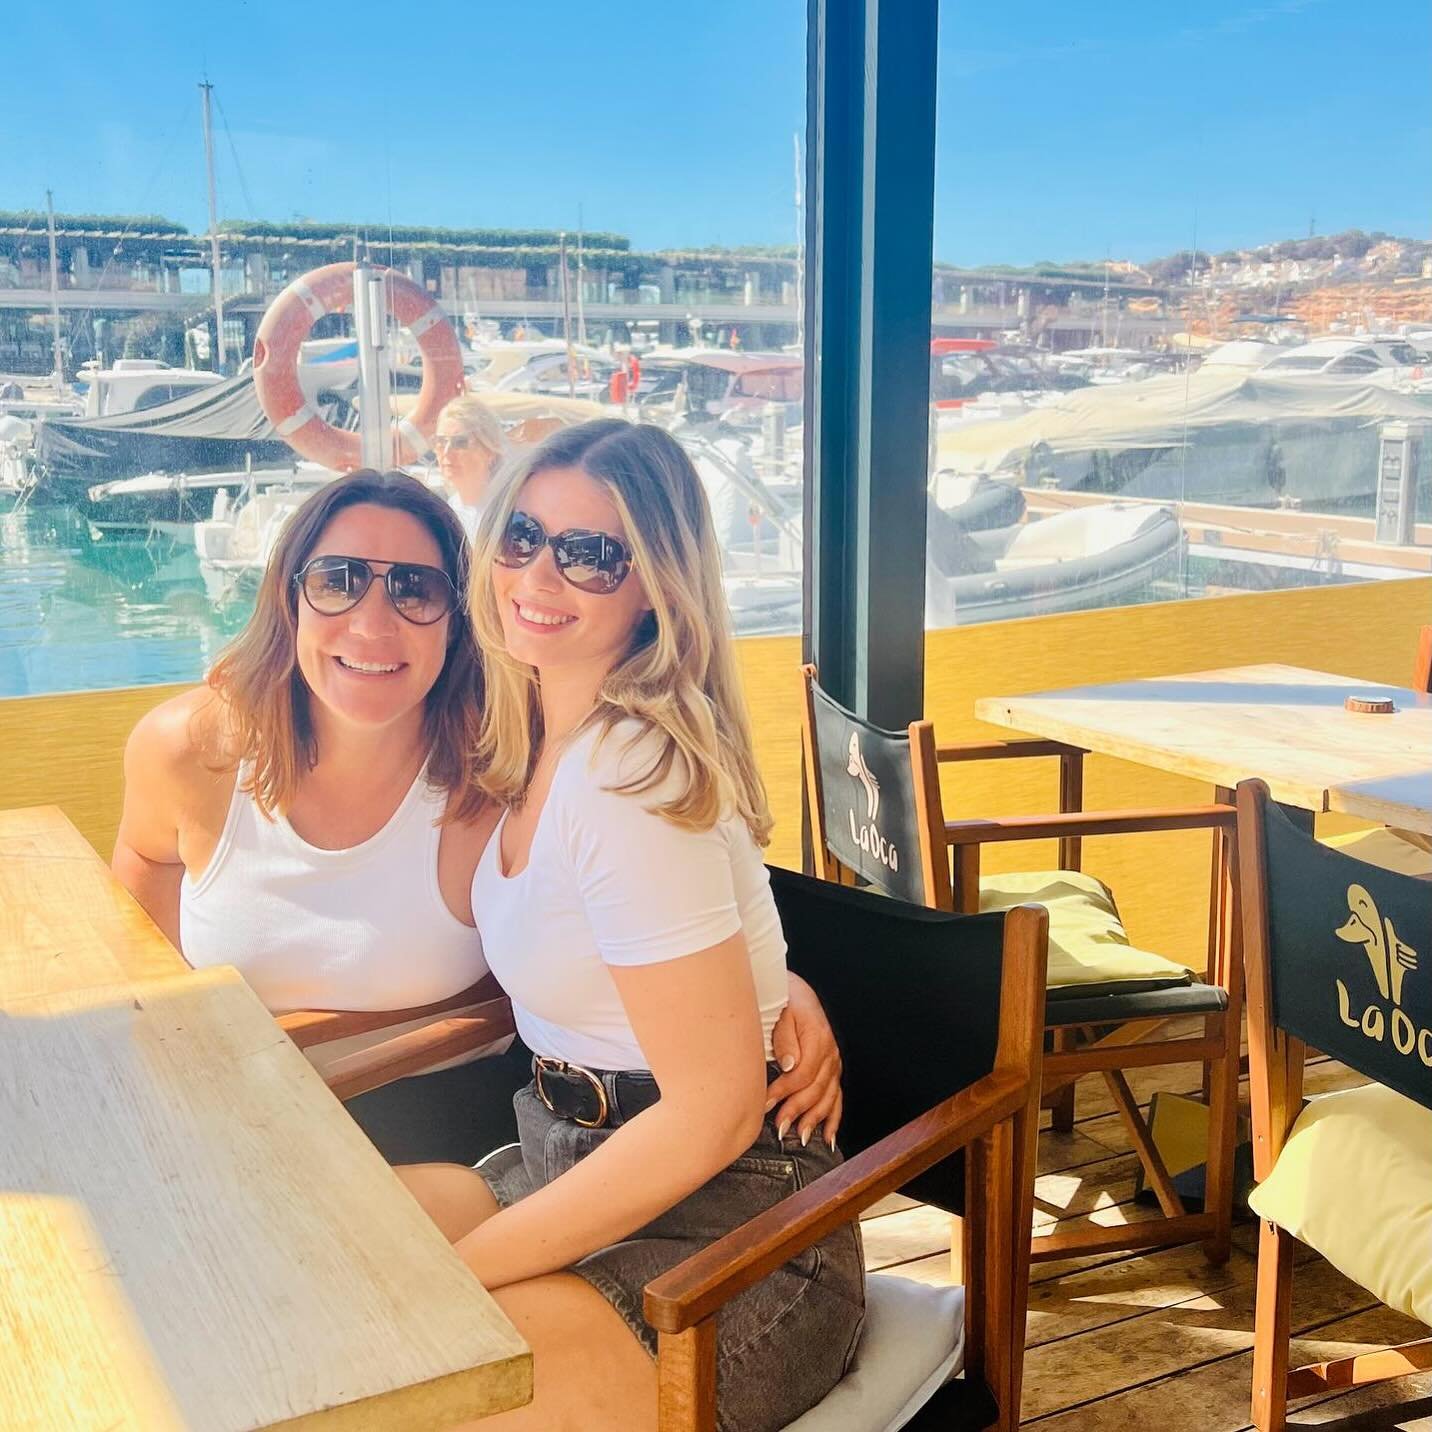 I really do care about every single one of my students 🥰

This is me with Jayne a past student of mine in Palma, Mallorca meeting up and have a good chat about how she&rsquo;s getting on in the yachting industry as a successful 3rd stewardess

Did y